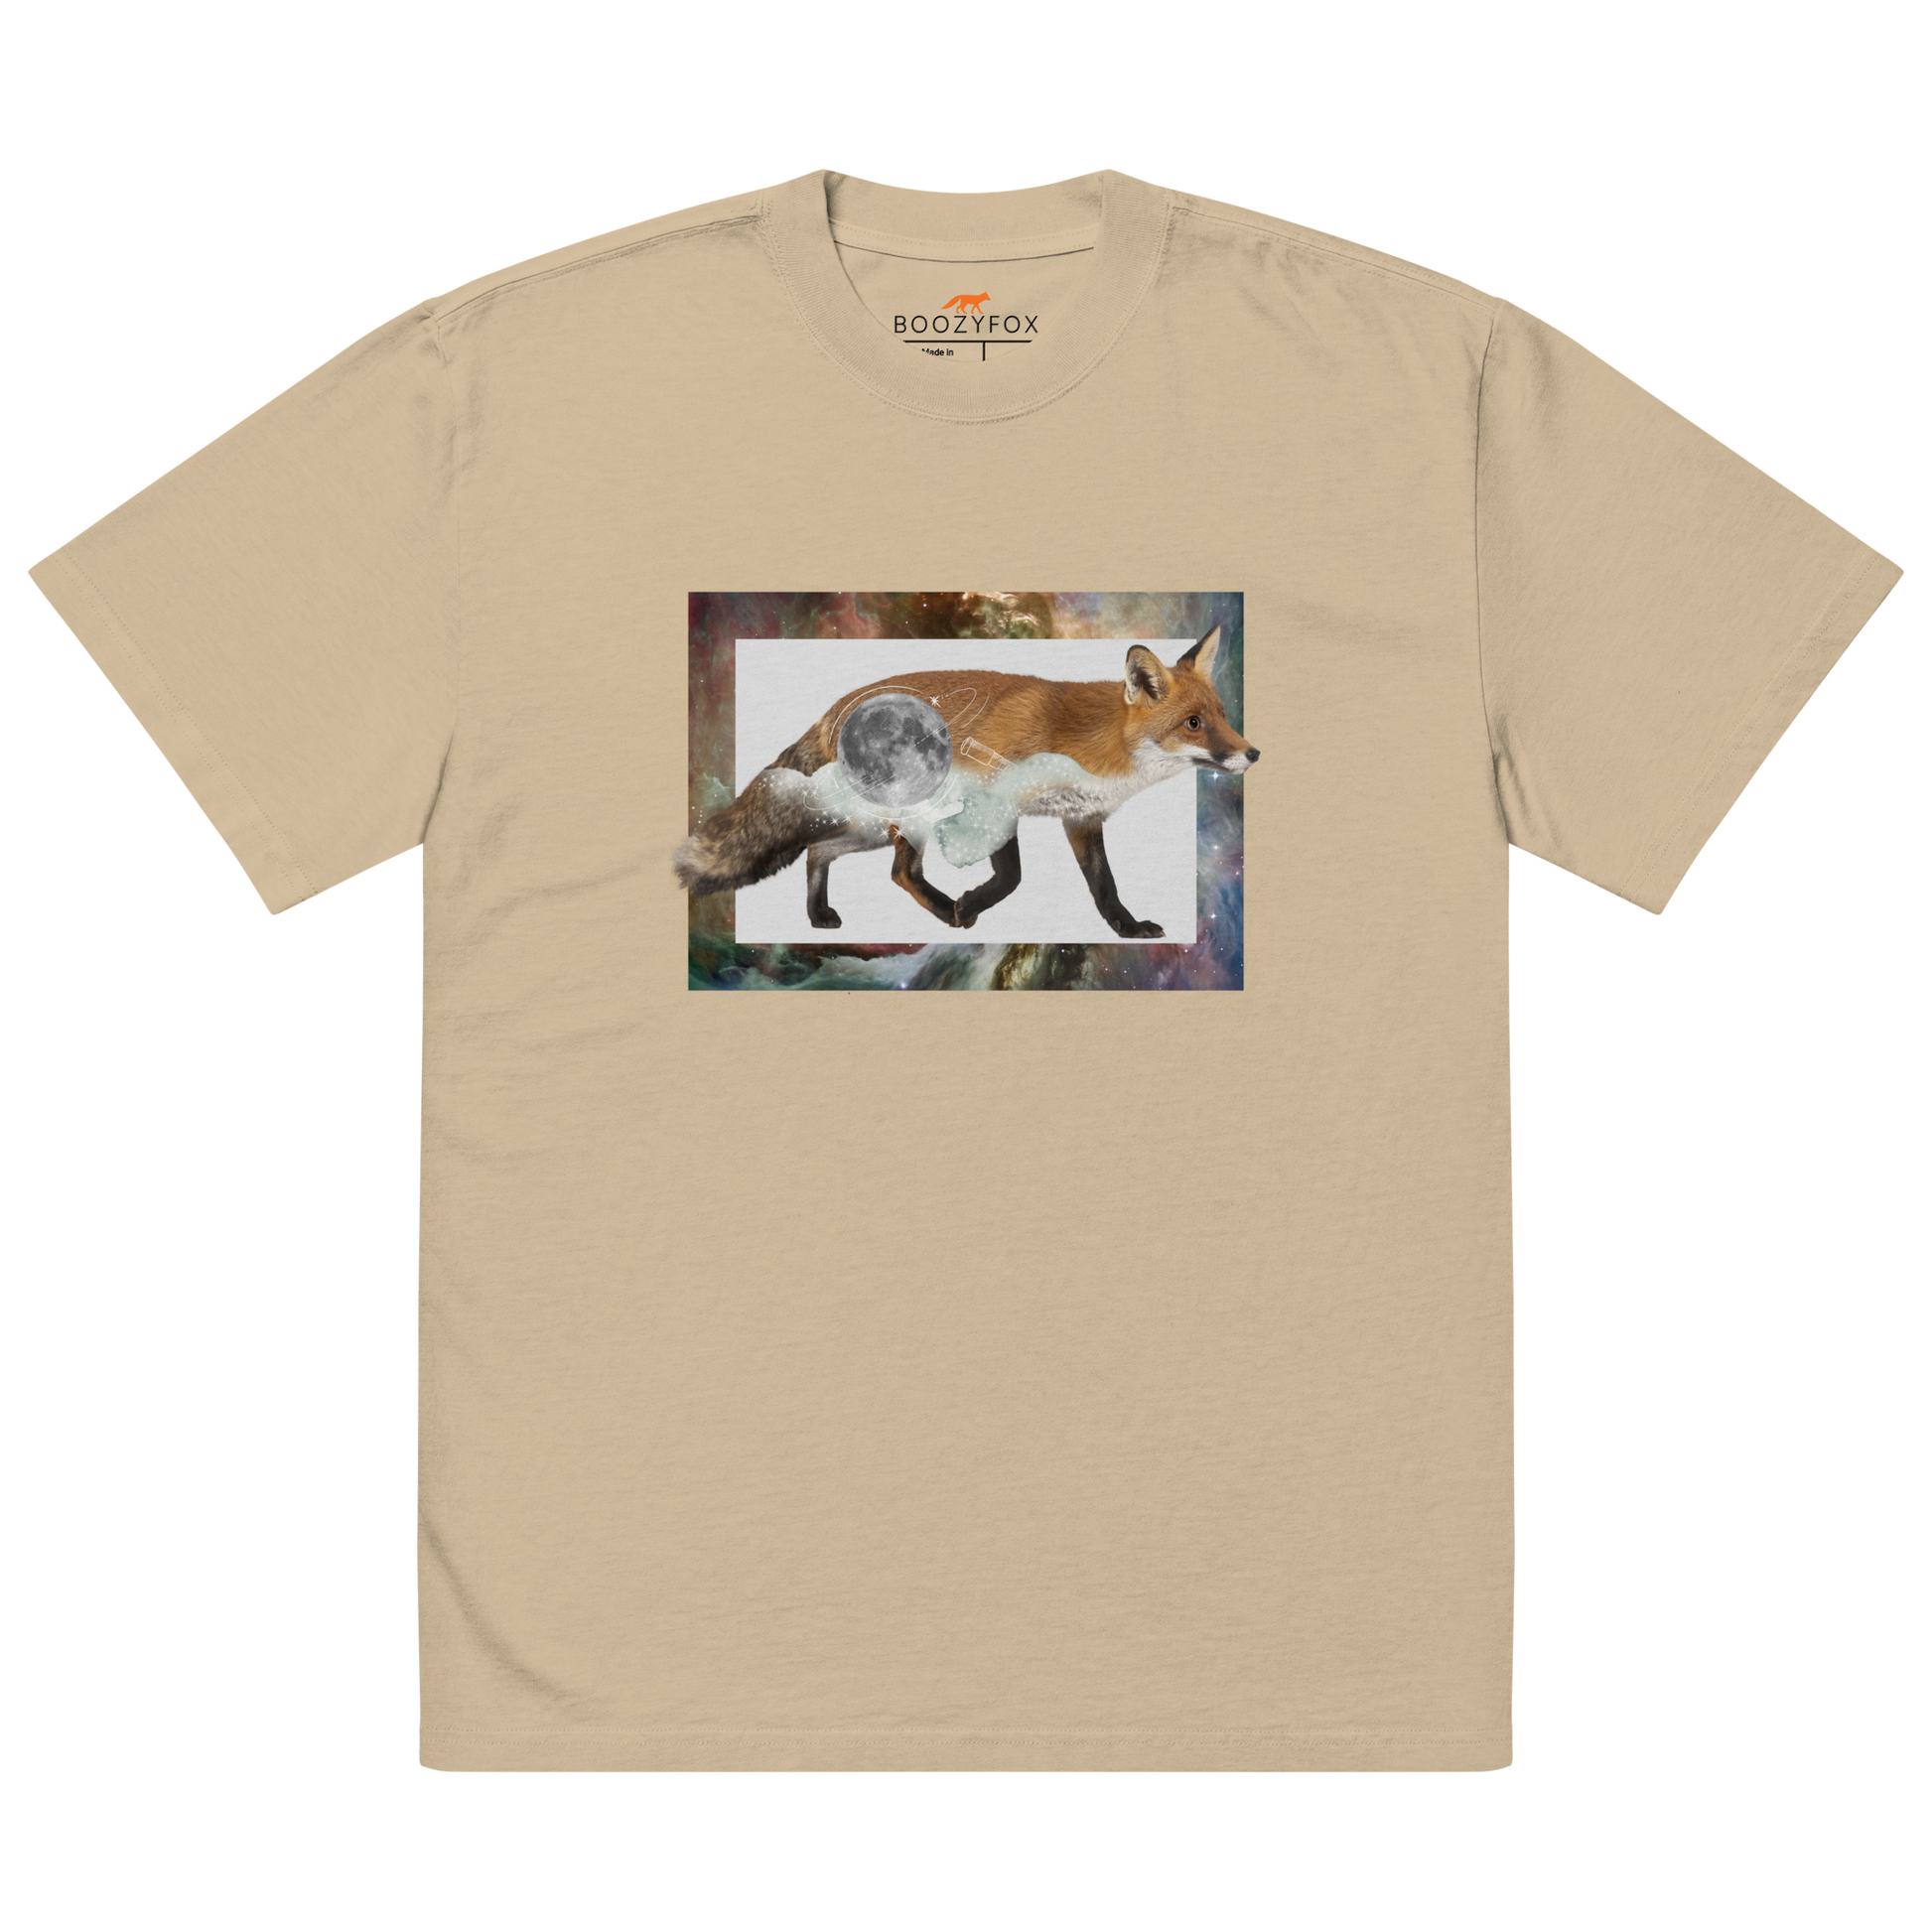 Faded Khaki Fox Oversized T-Shirt featuring a stellar Space Fox graphic on the chest - Cool Graphic Fox Oversized Tees - Boozy Fox